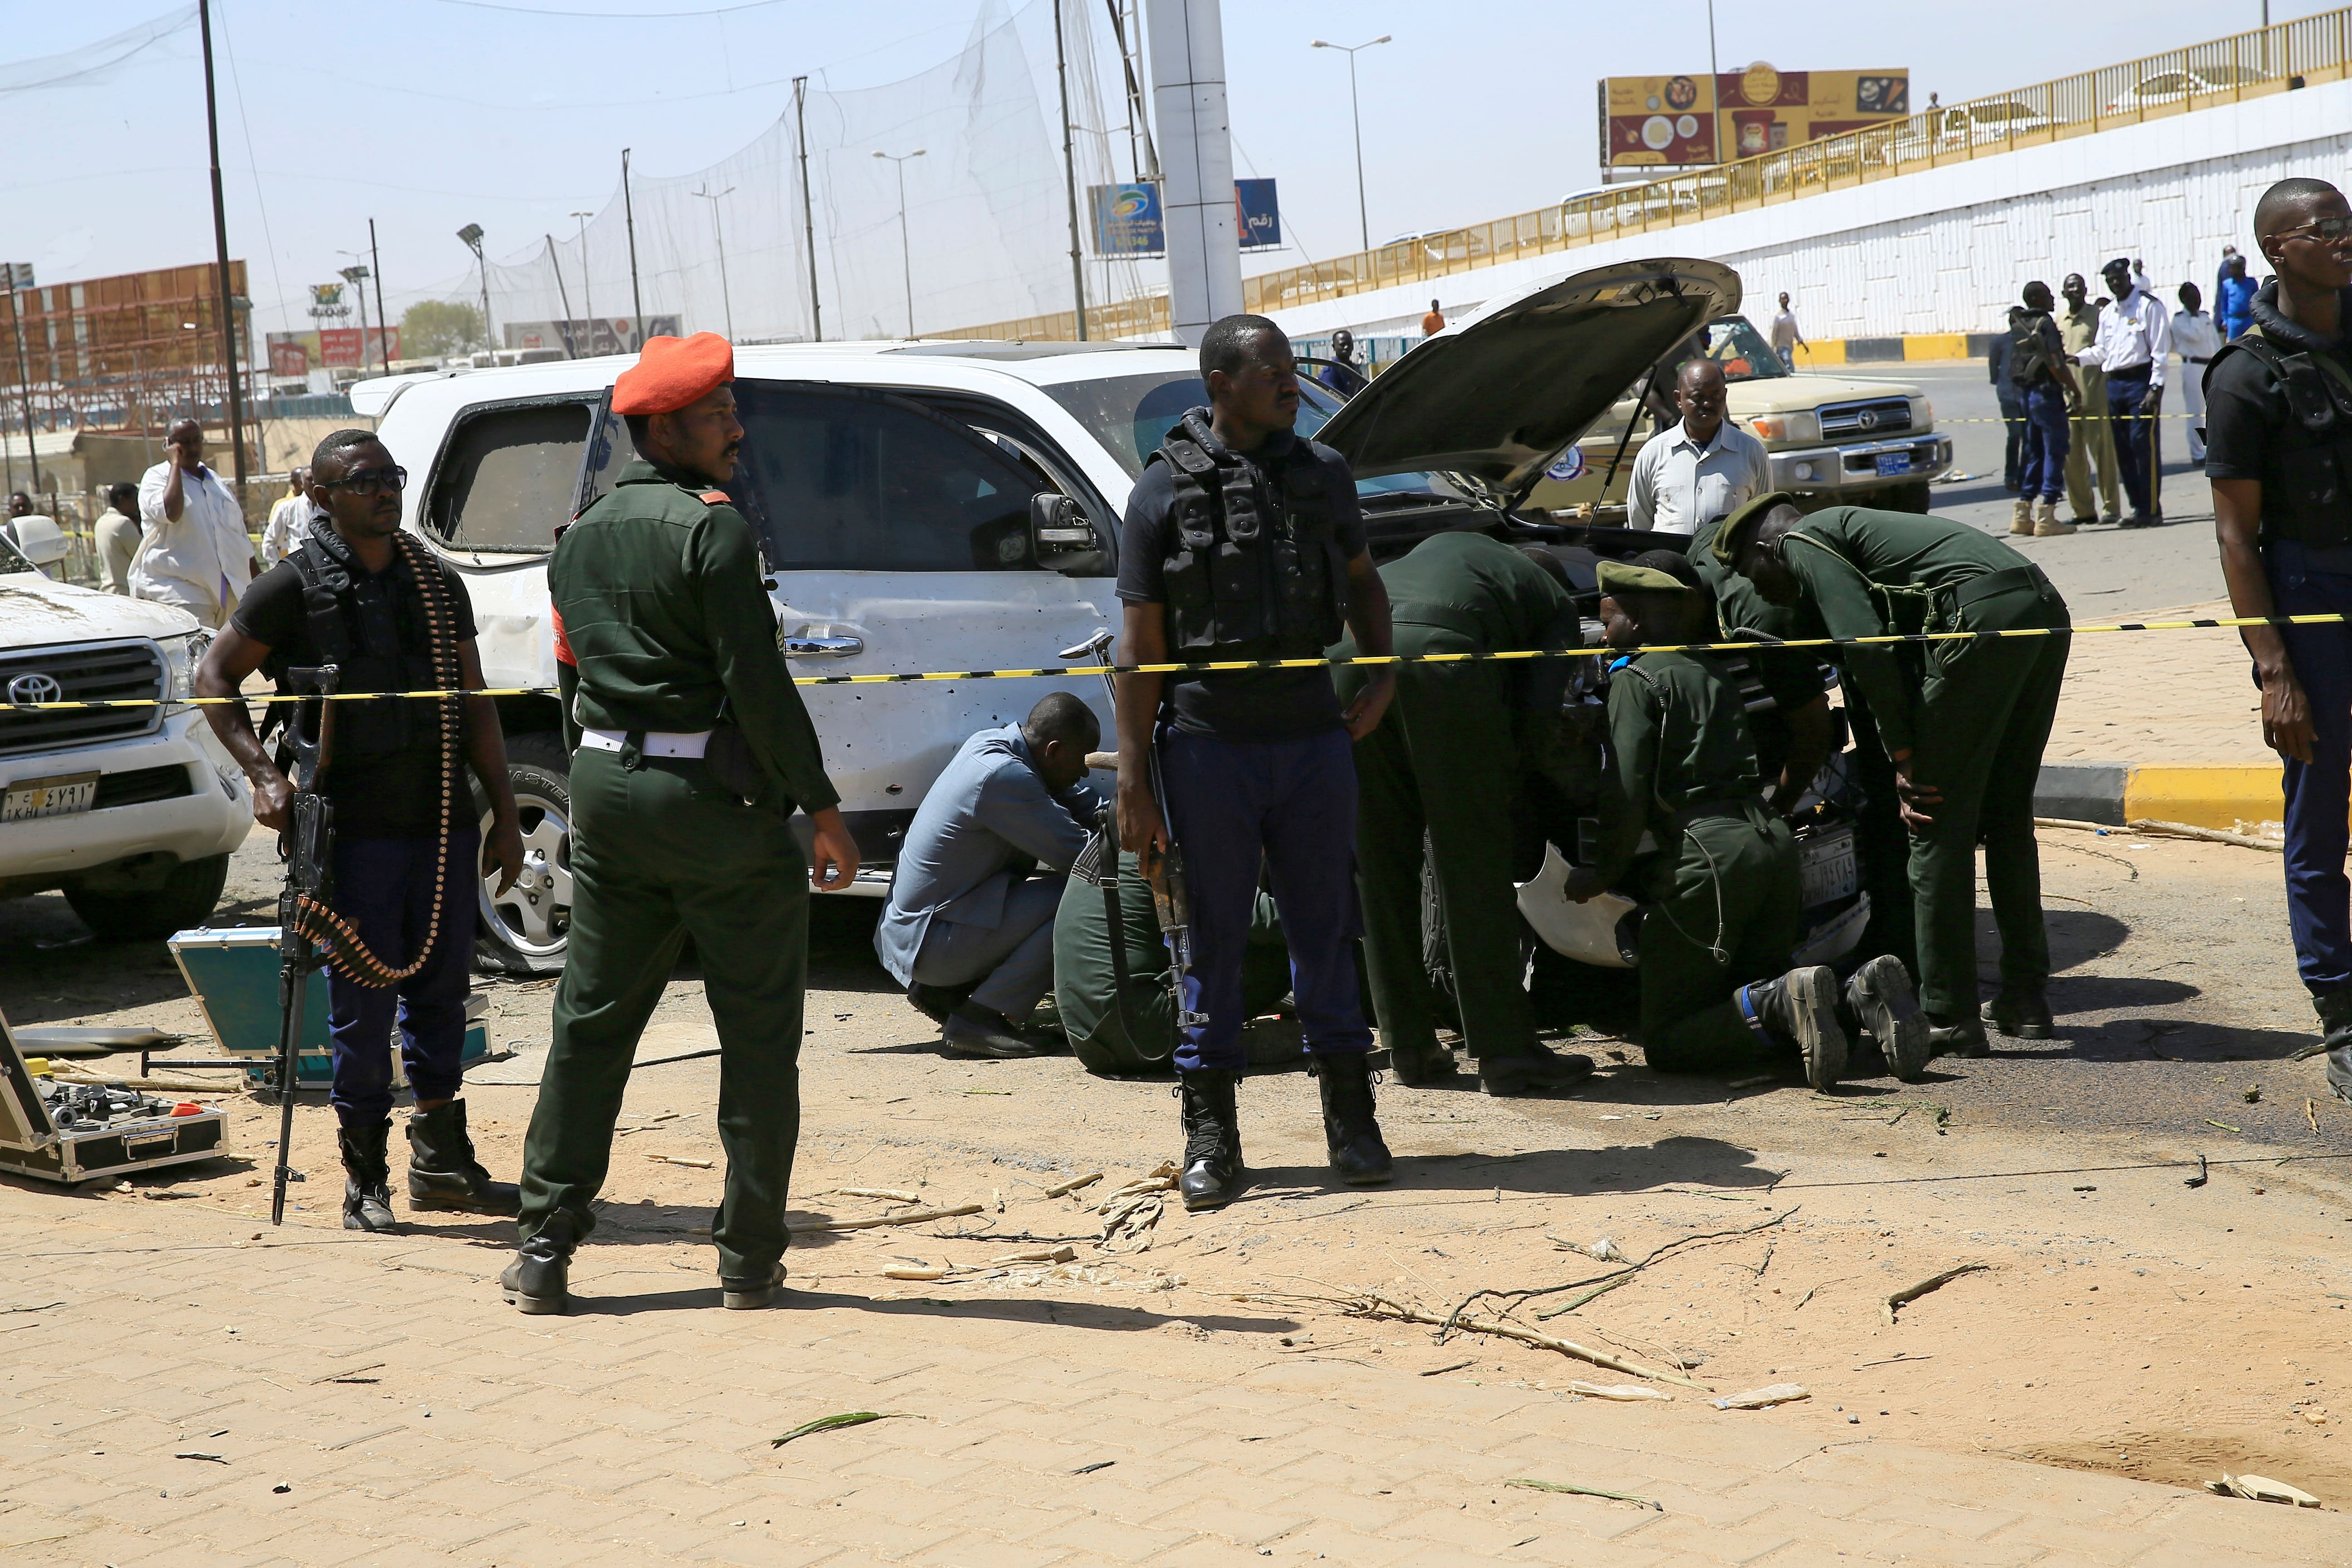 Security personnel stand near a car damaged after an explosion targeting the motorcade of Sudan's Prime Minister Abdallah Hamdok near the Kober Bridge in Khartoum, Sudan. (Credit: Reuters Photo)